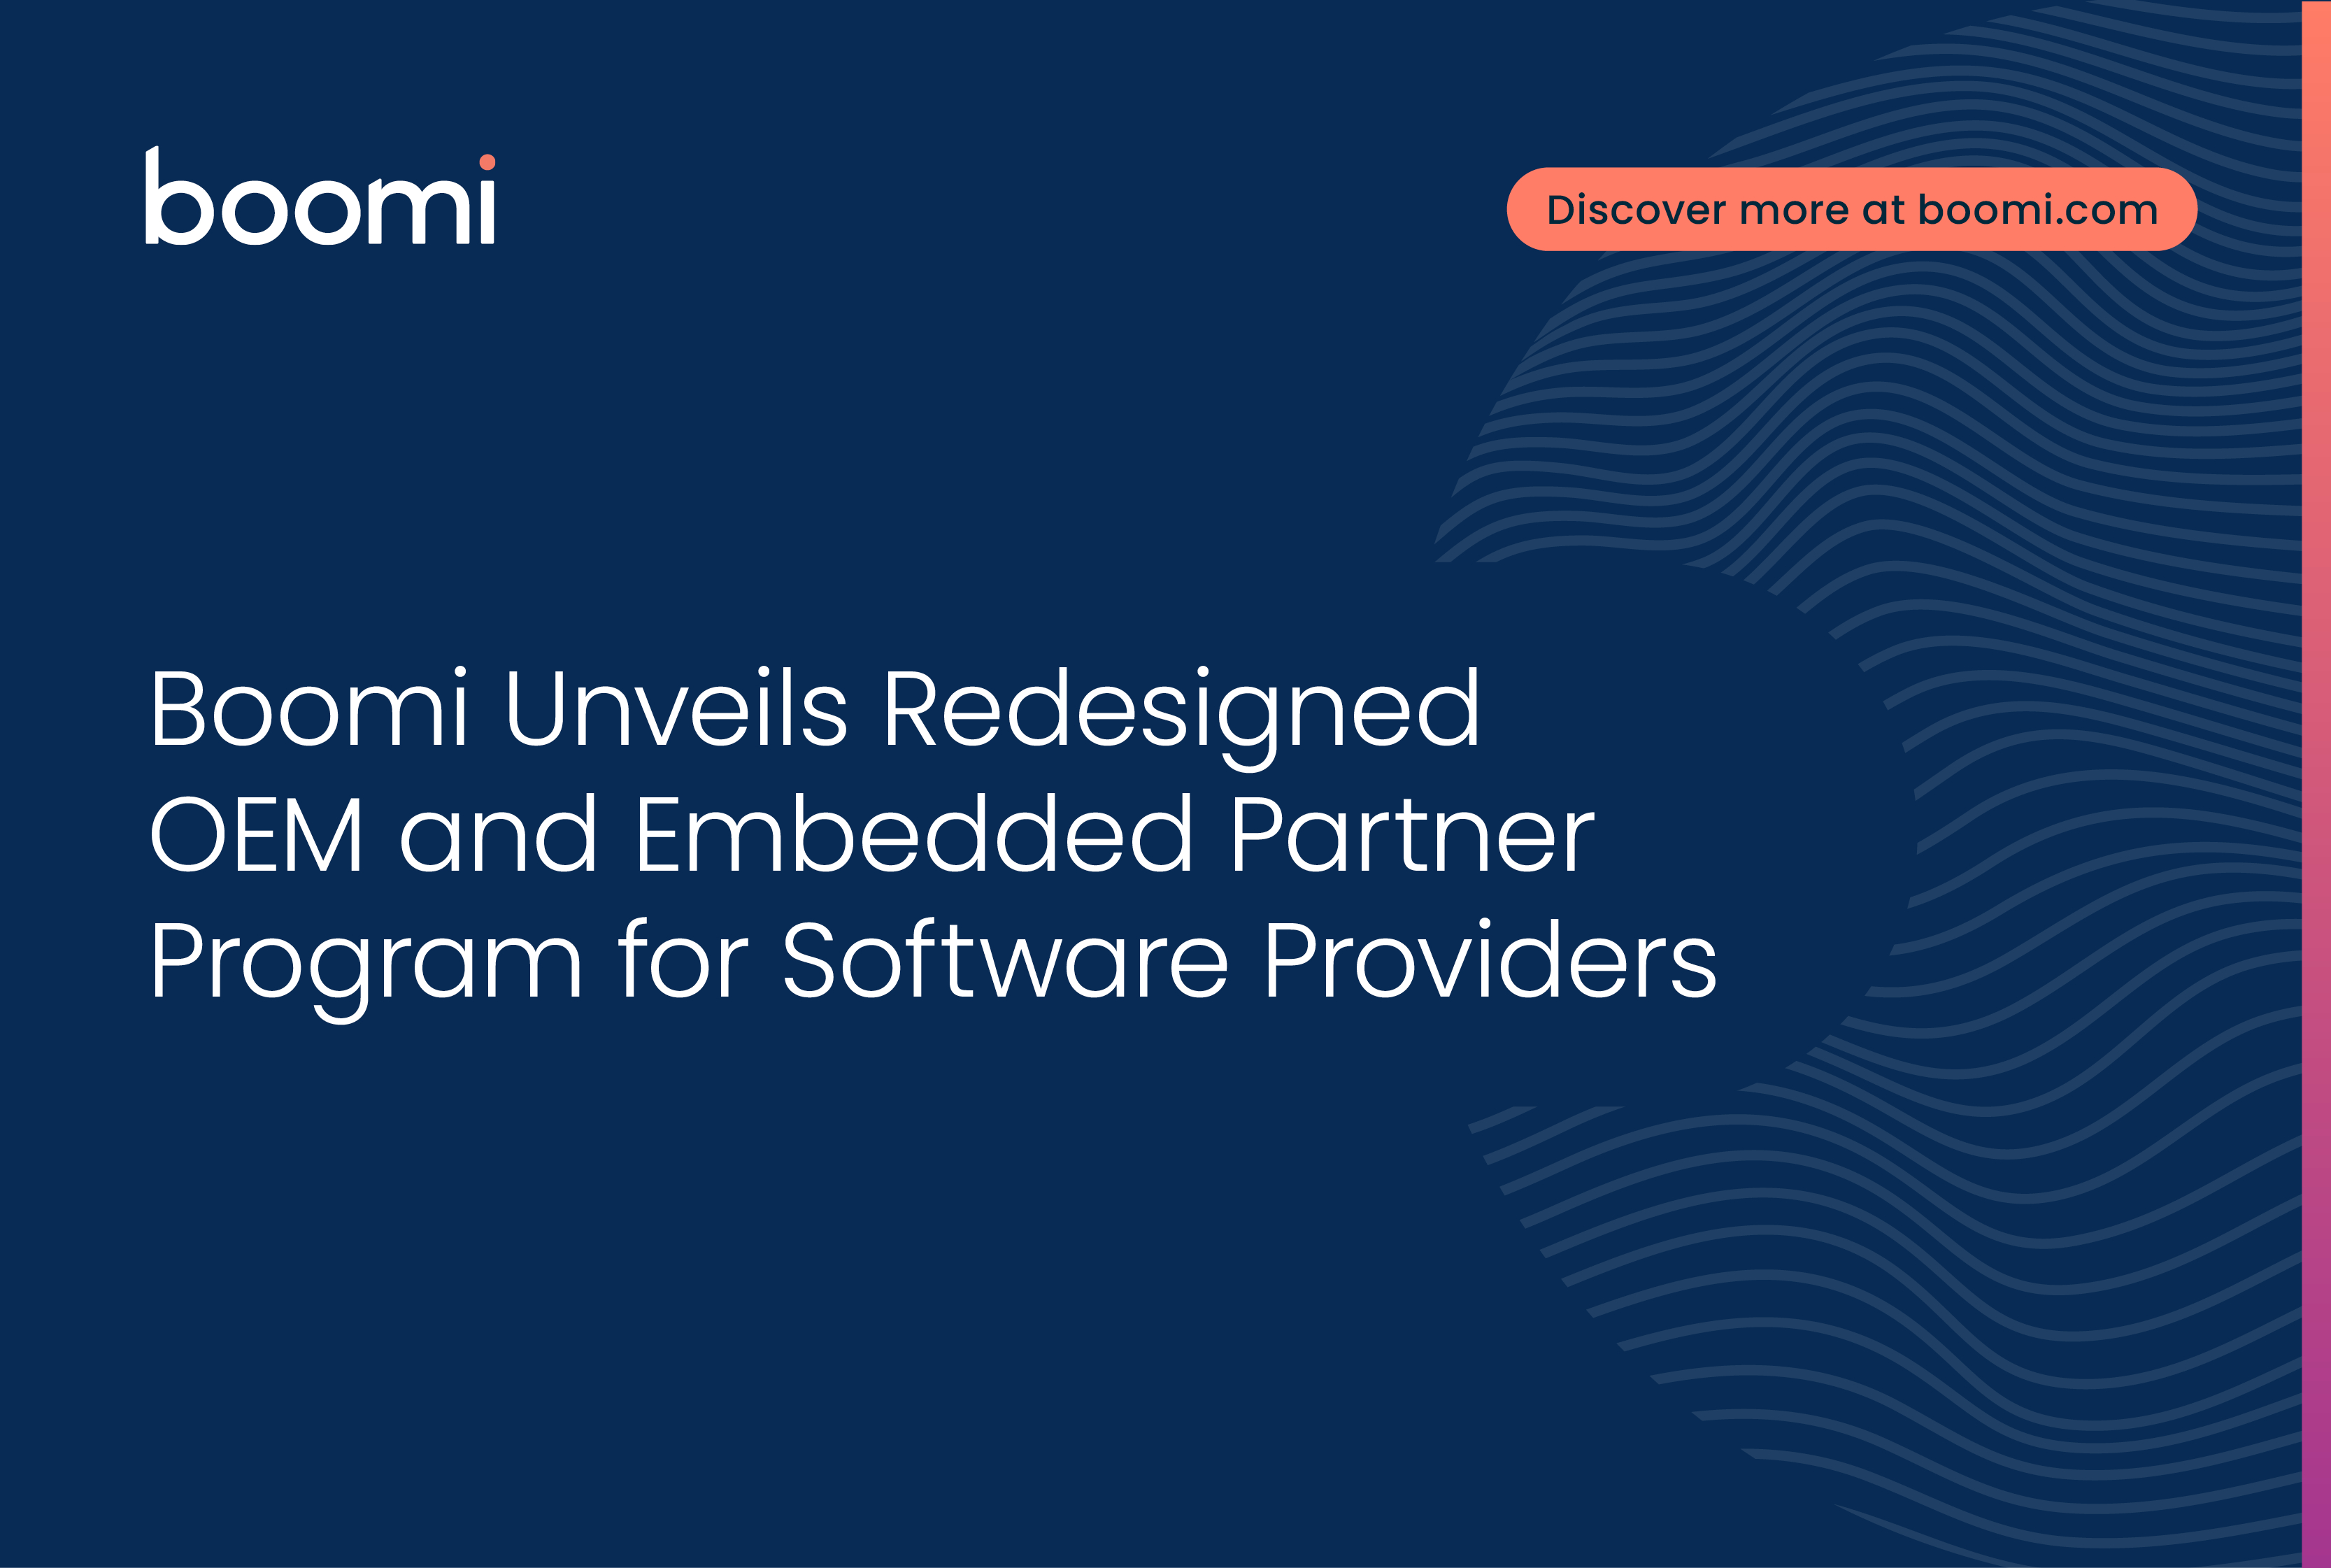 Boomi Unveils Redesigned OEM and Embedded Partner Program for